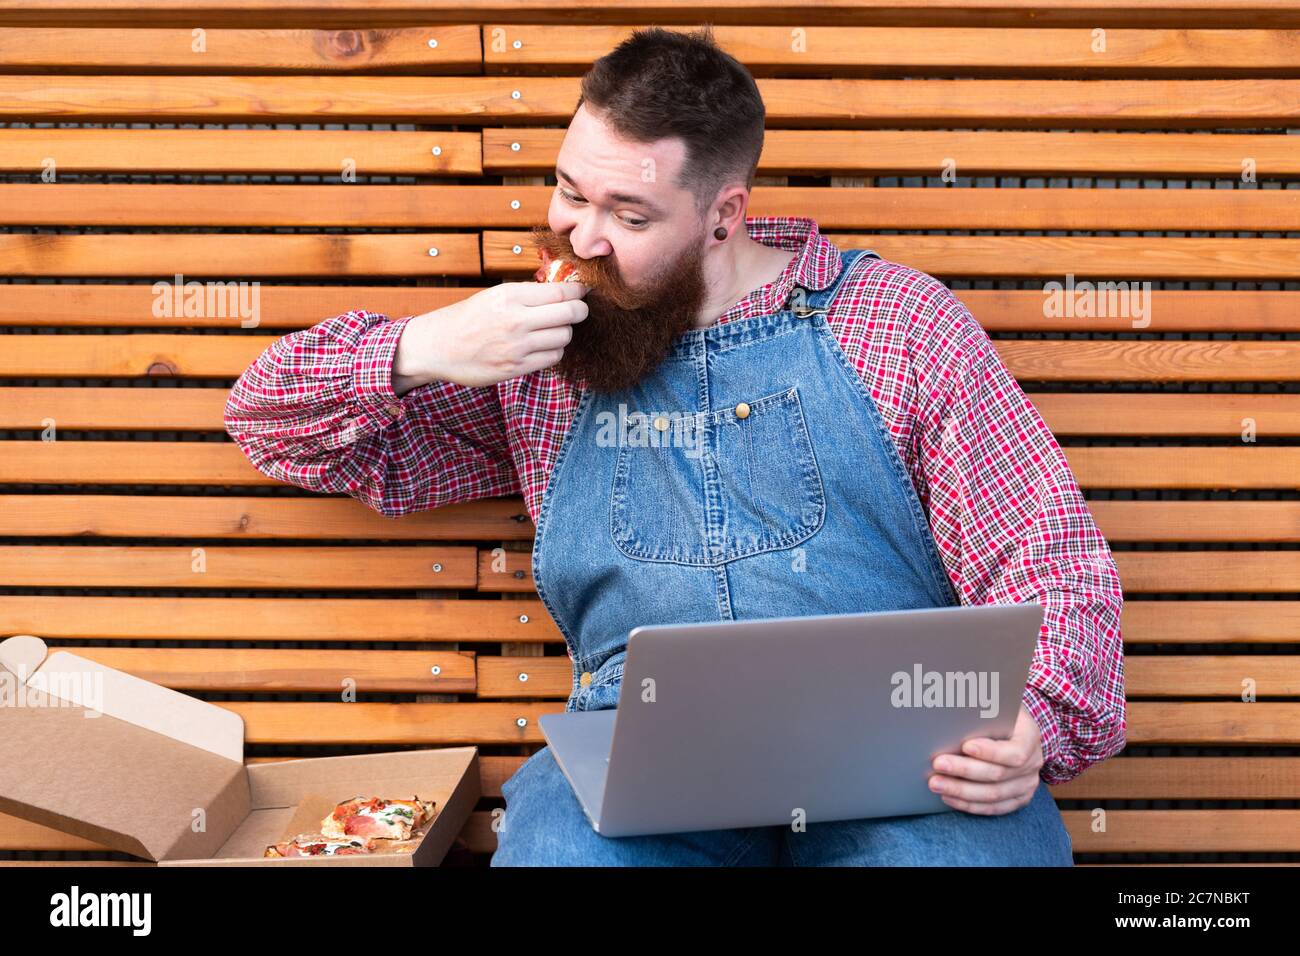 Busy multitask bearded hipster man in blue jeans overalls, checked shirt working on laptop and eating take away pizza, sitting on bench. Fast food Stock Photo